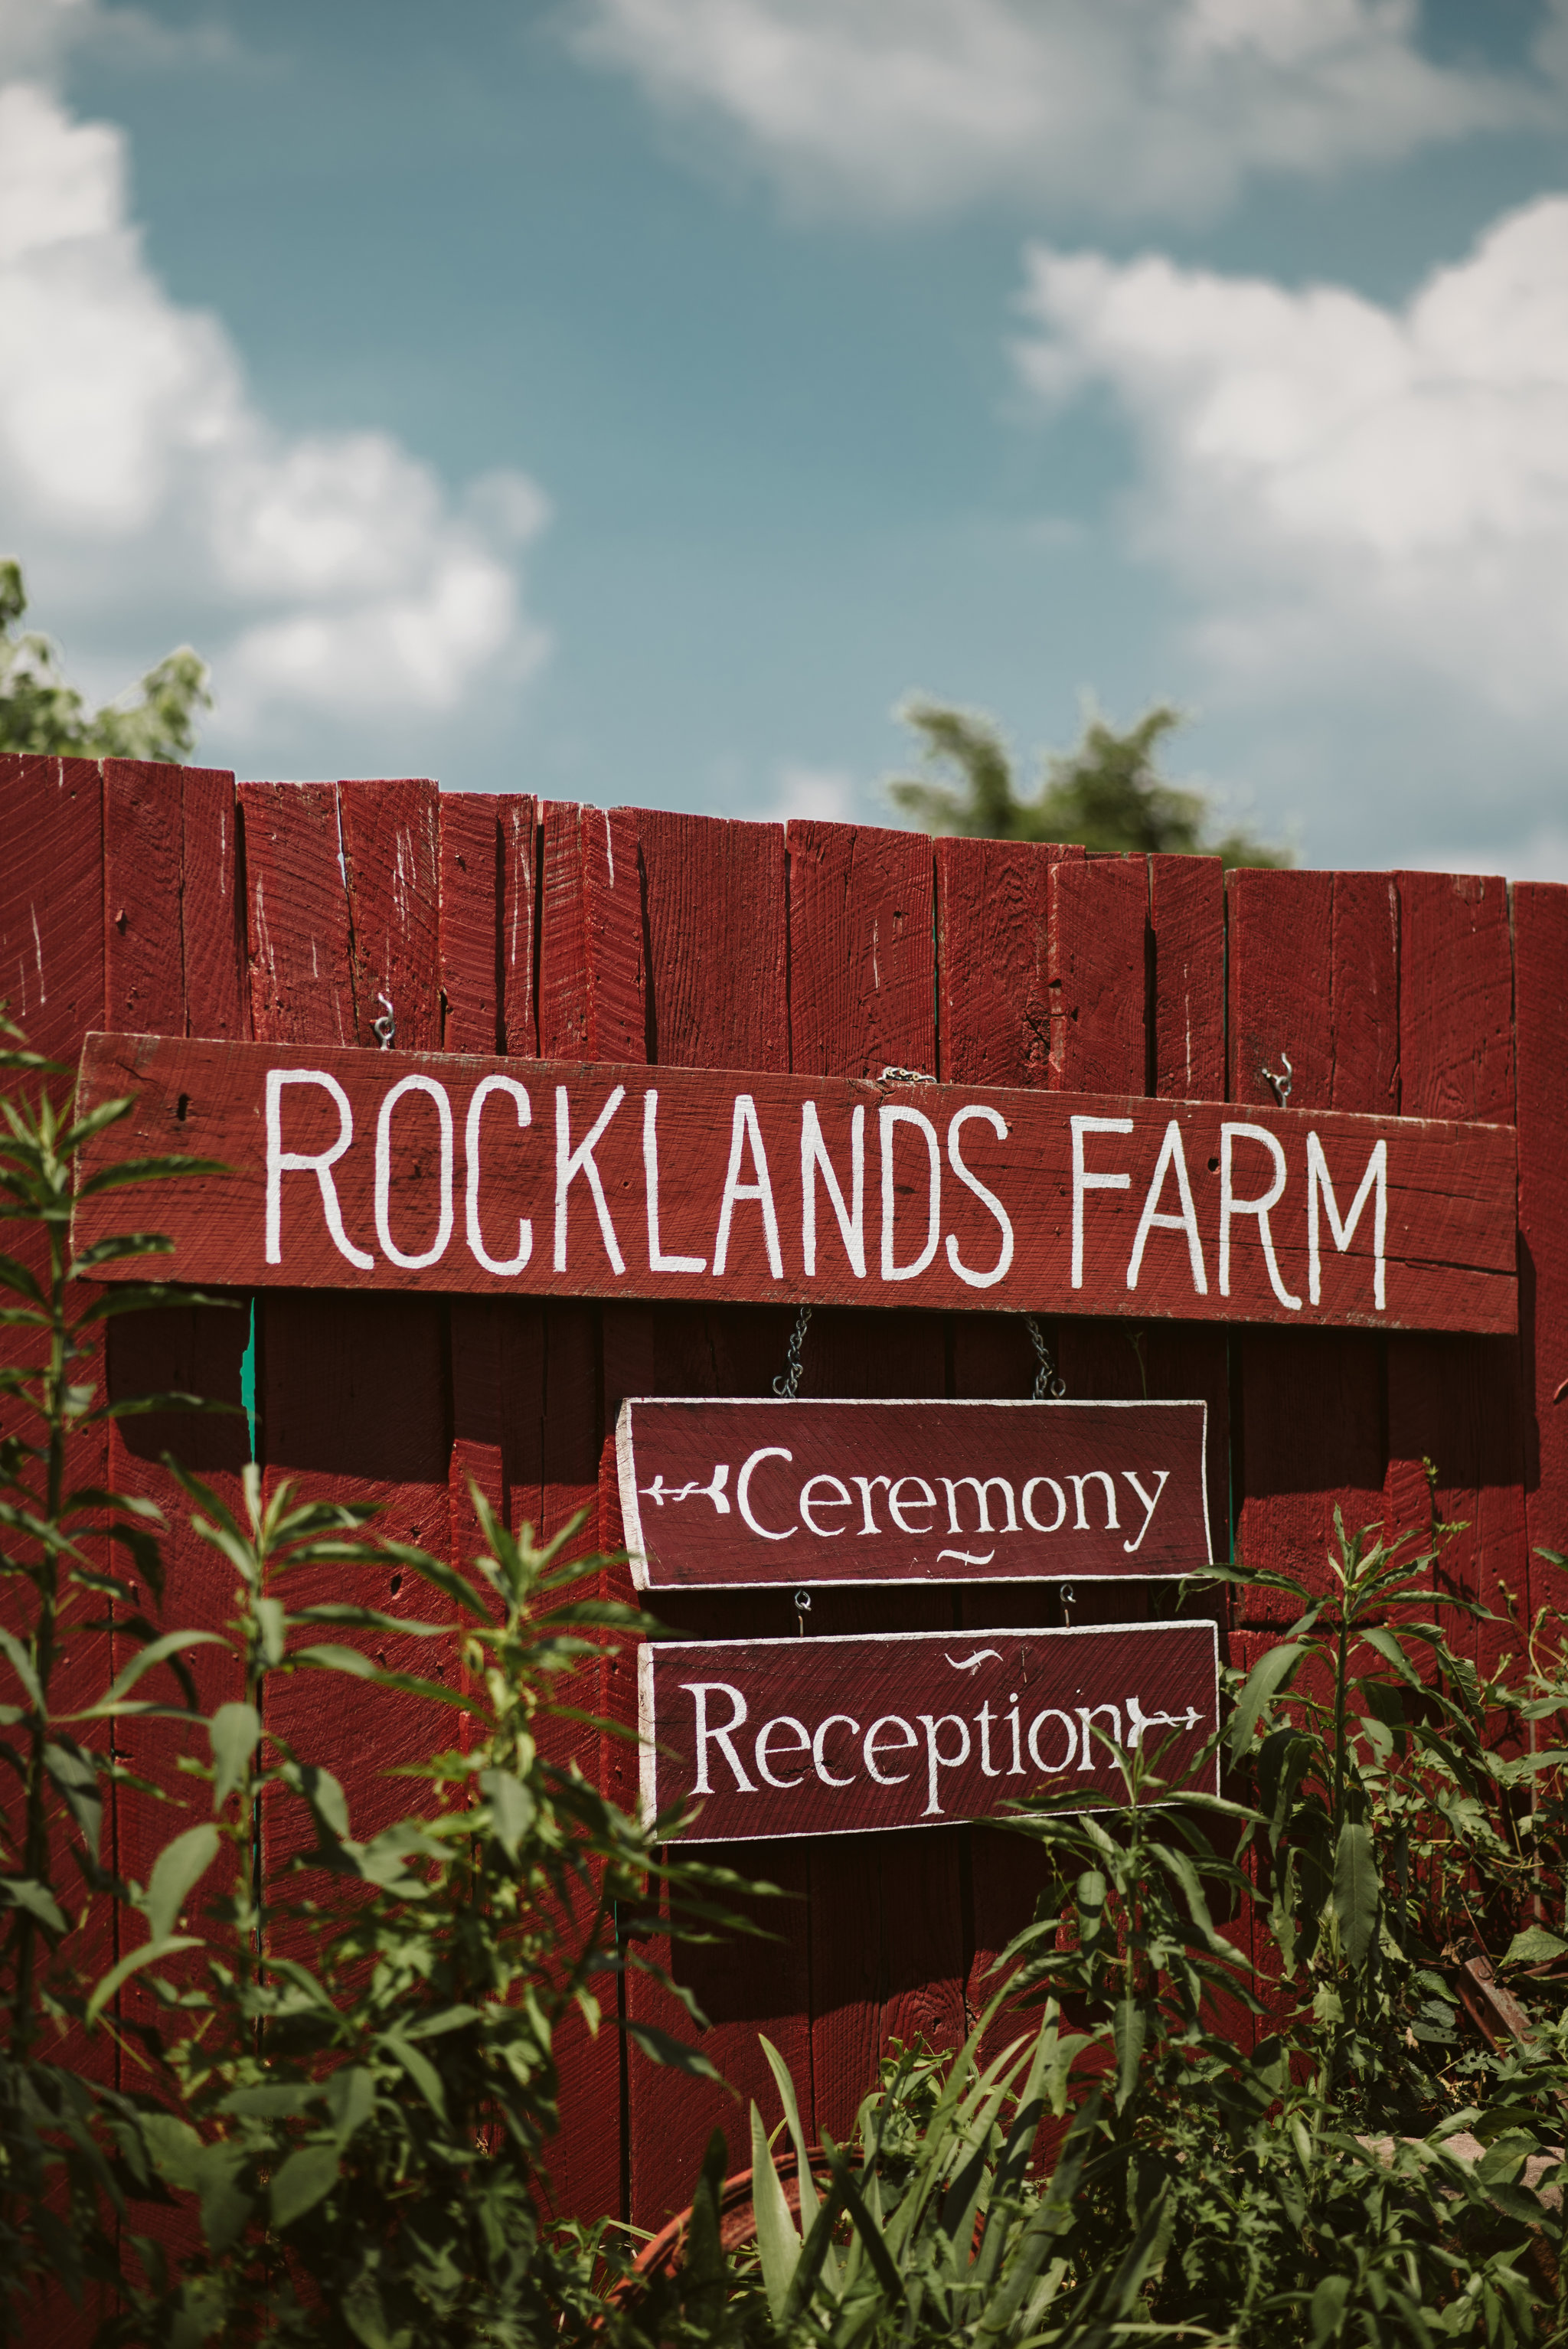 Rocklands Farm, Maryland, Intimate Wedding, Baltimore Wedding Photographer, Sungold Flower Co, Rustic, Romantic, Barn Wedding, Hand Painted Ceremony Signage on Fence